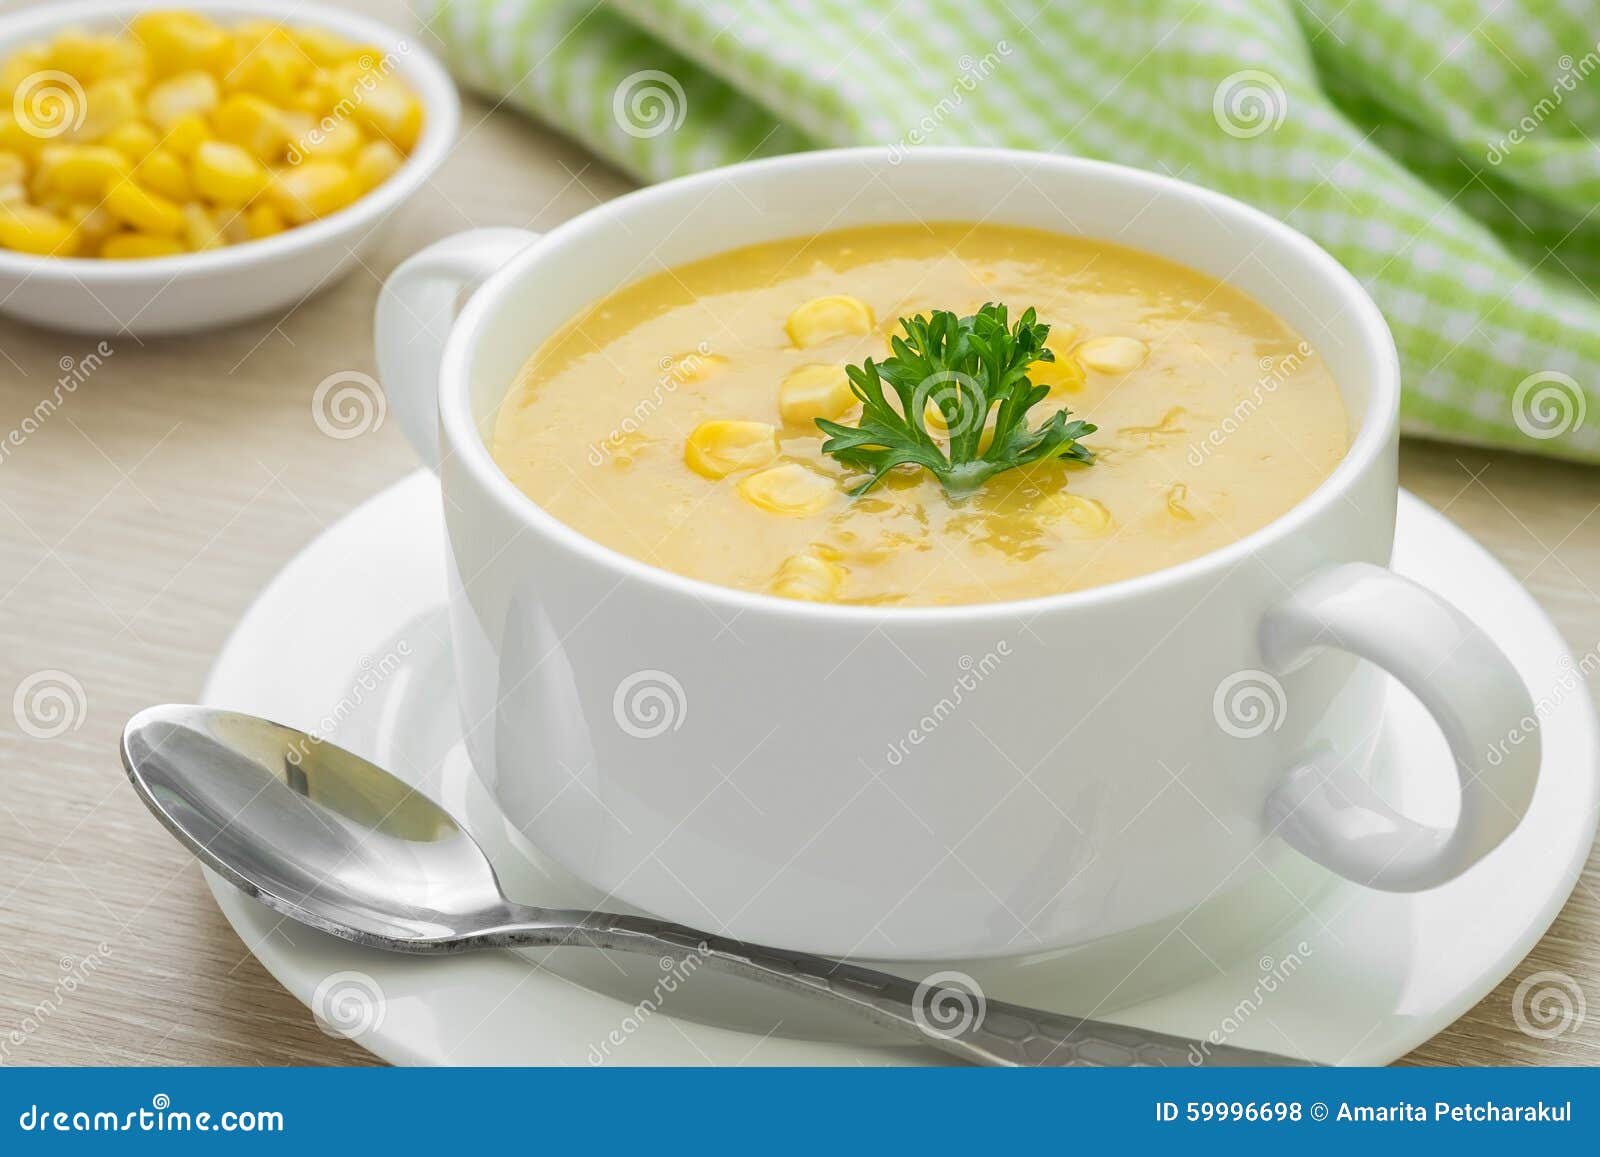 Corn Soup In Bowl Stock Photo - Image: 59996698